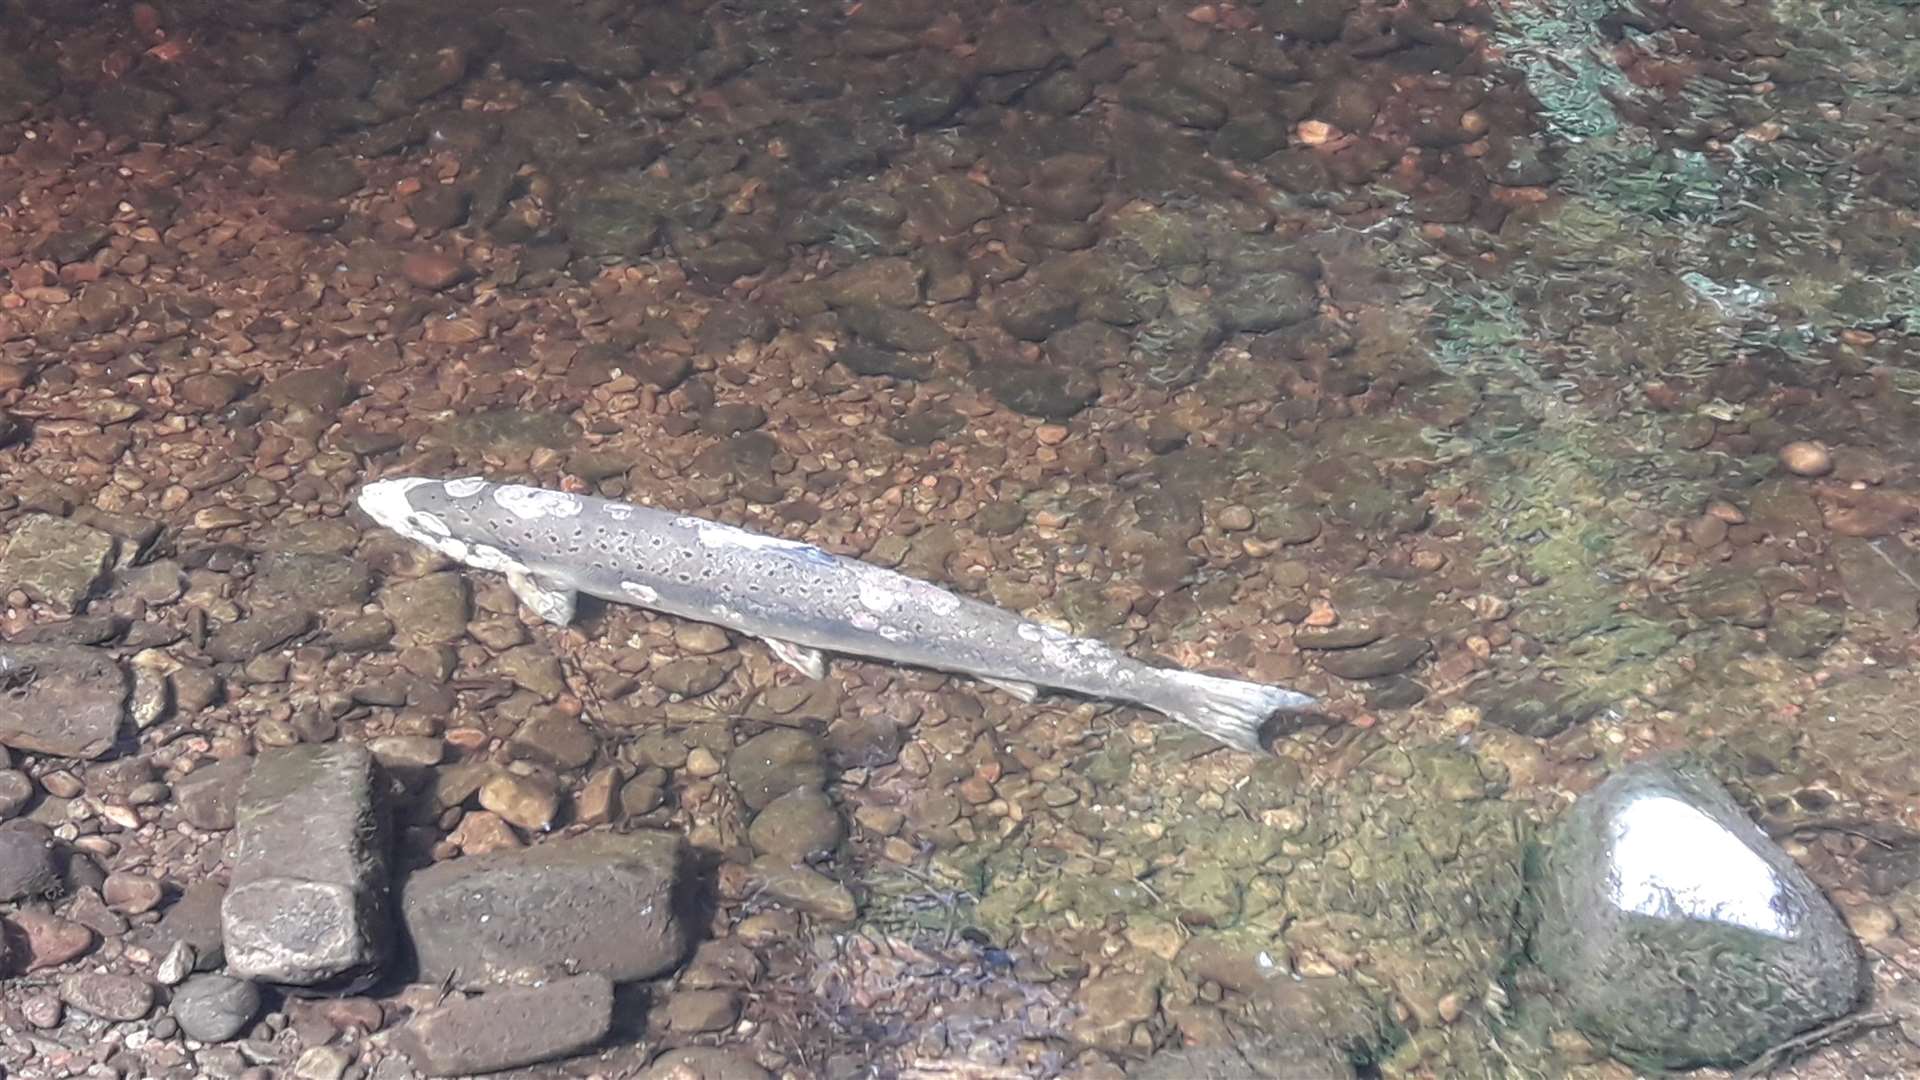 The salmon's loose scales are clearly visible.